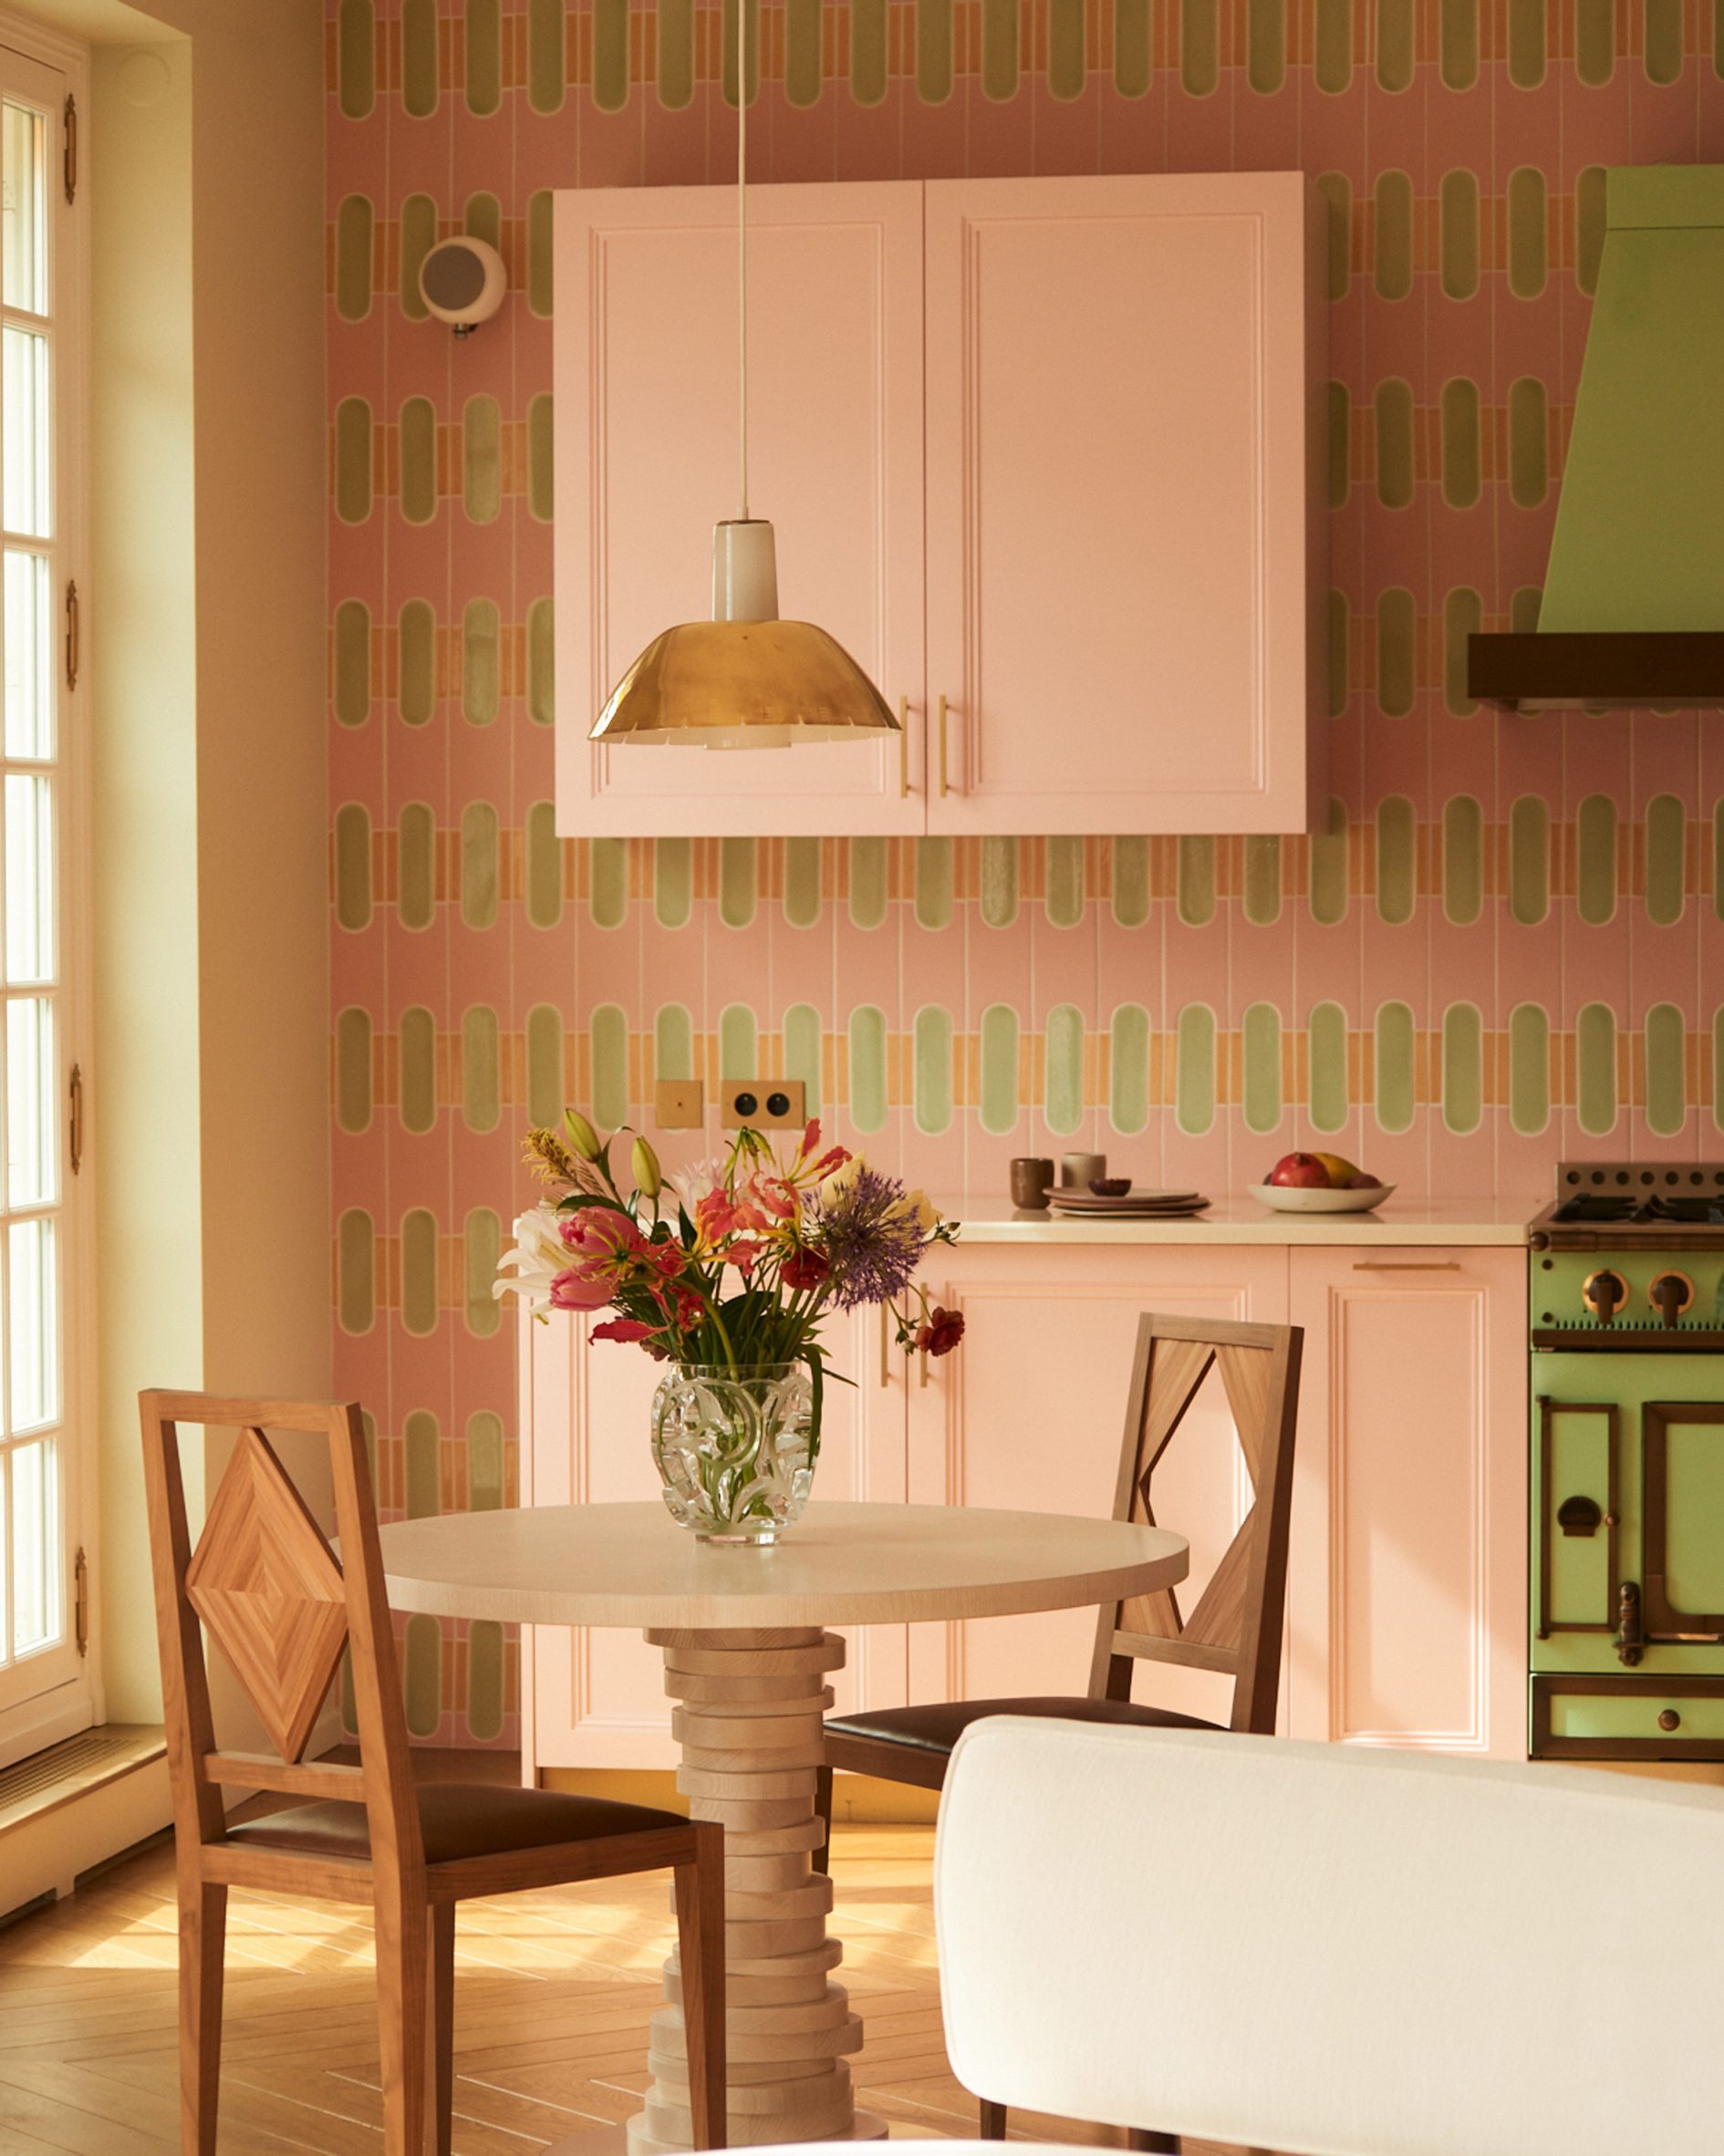 Pink and green contrasting kitchen